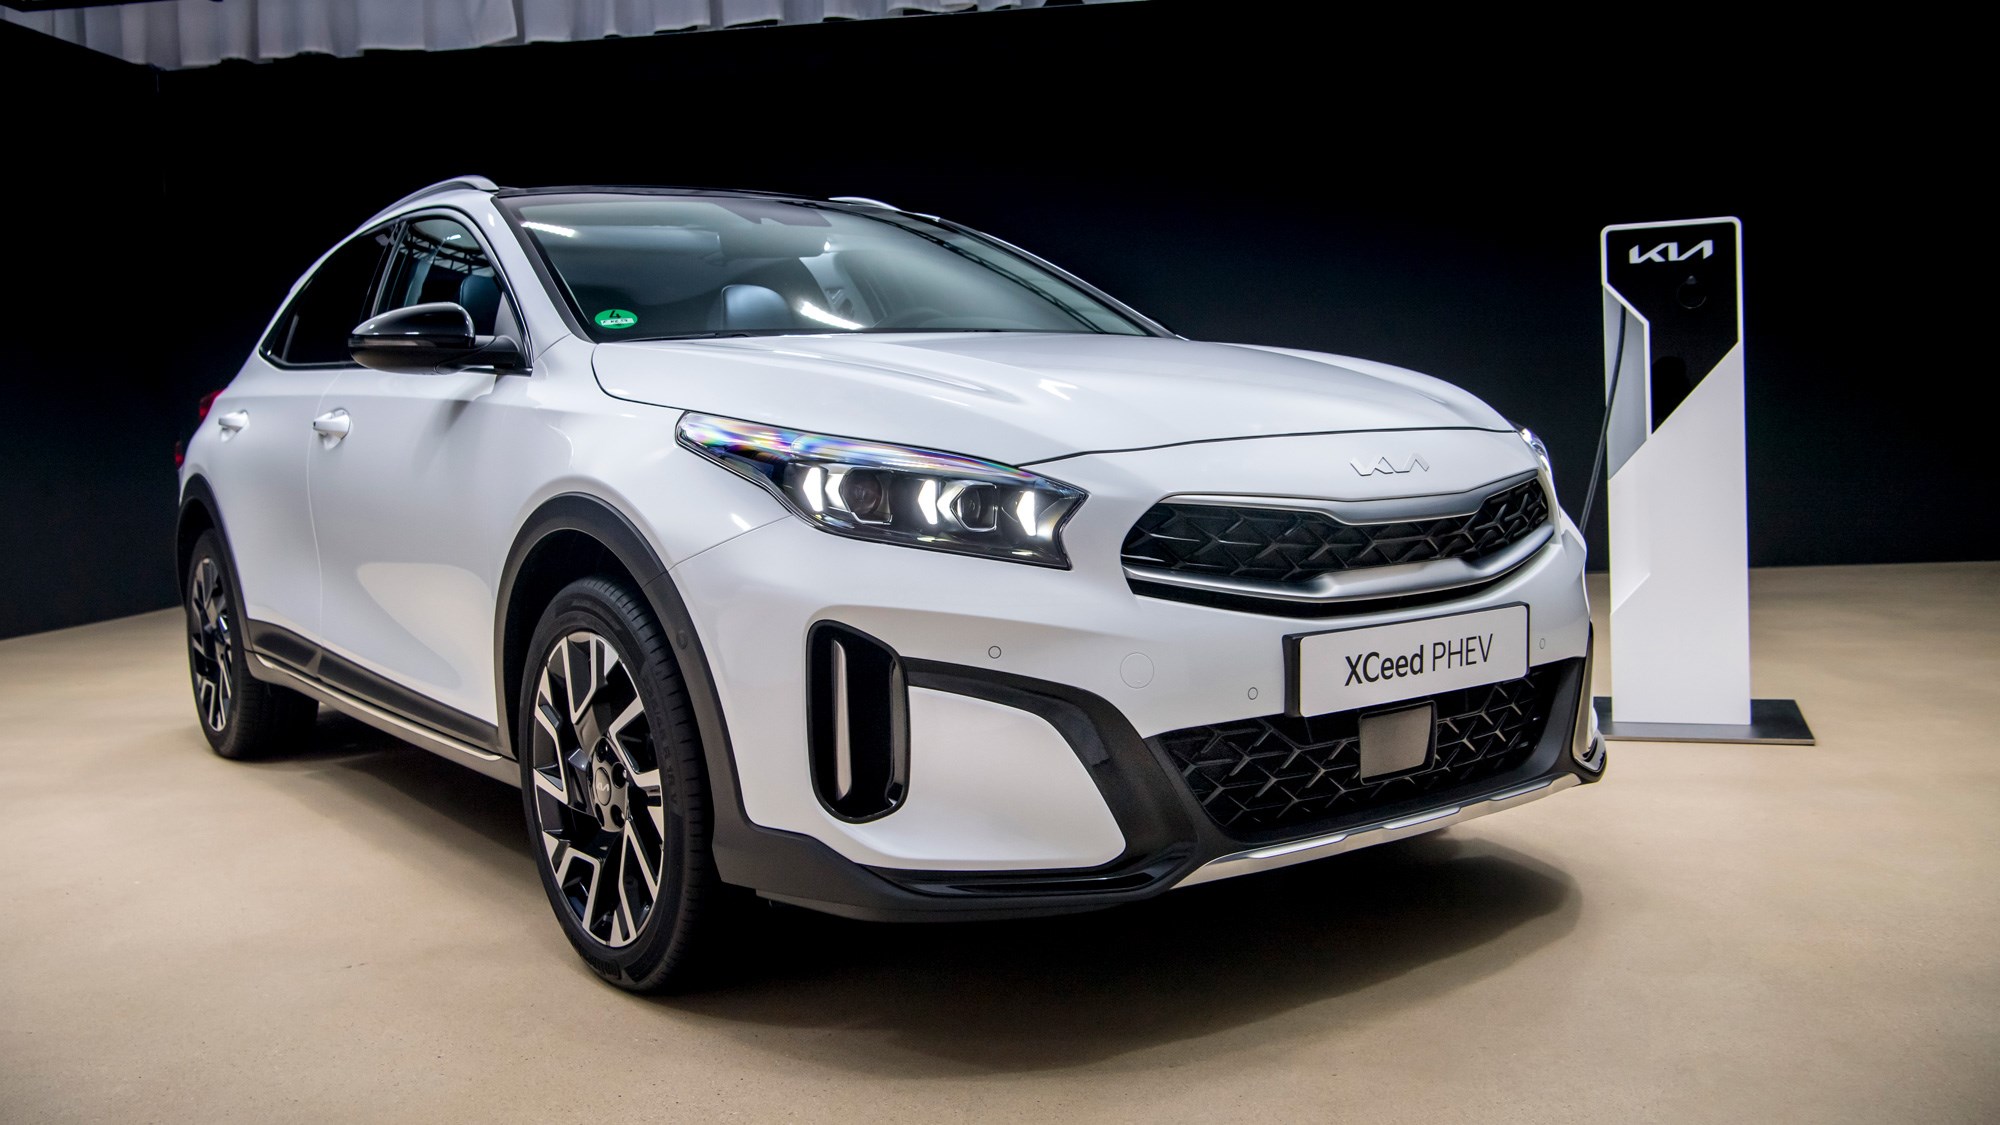 New 2022 Kia XCeed facelift on sale in the UK now priced from £22,995